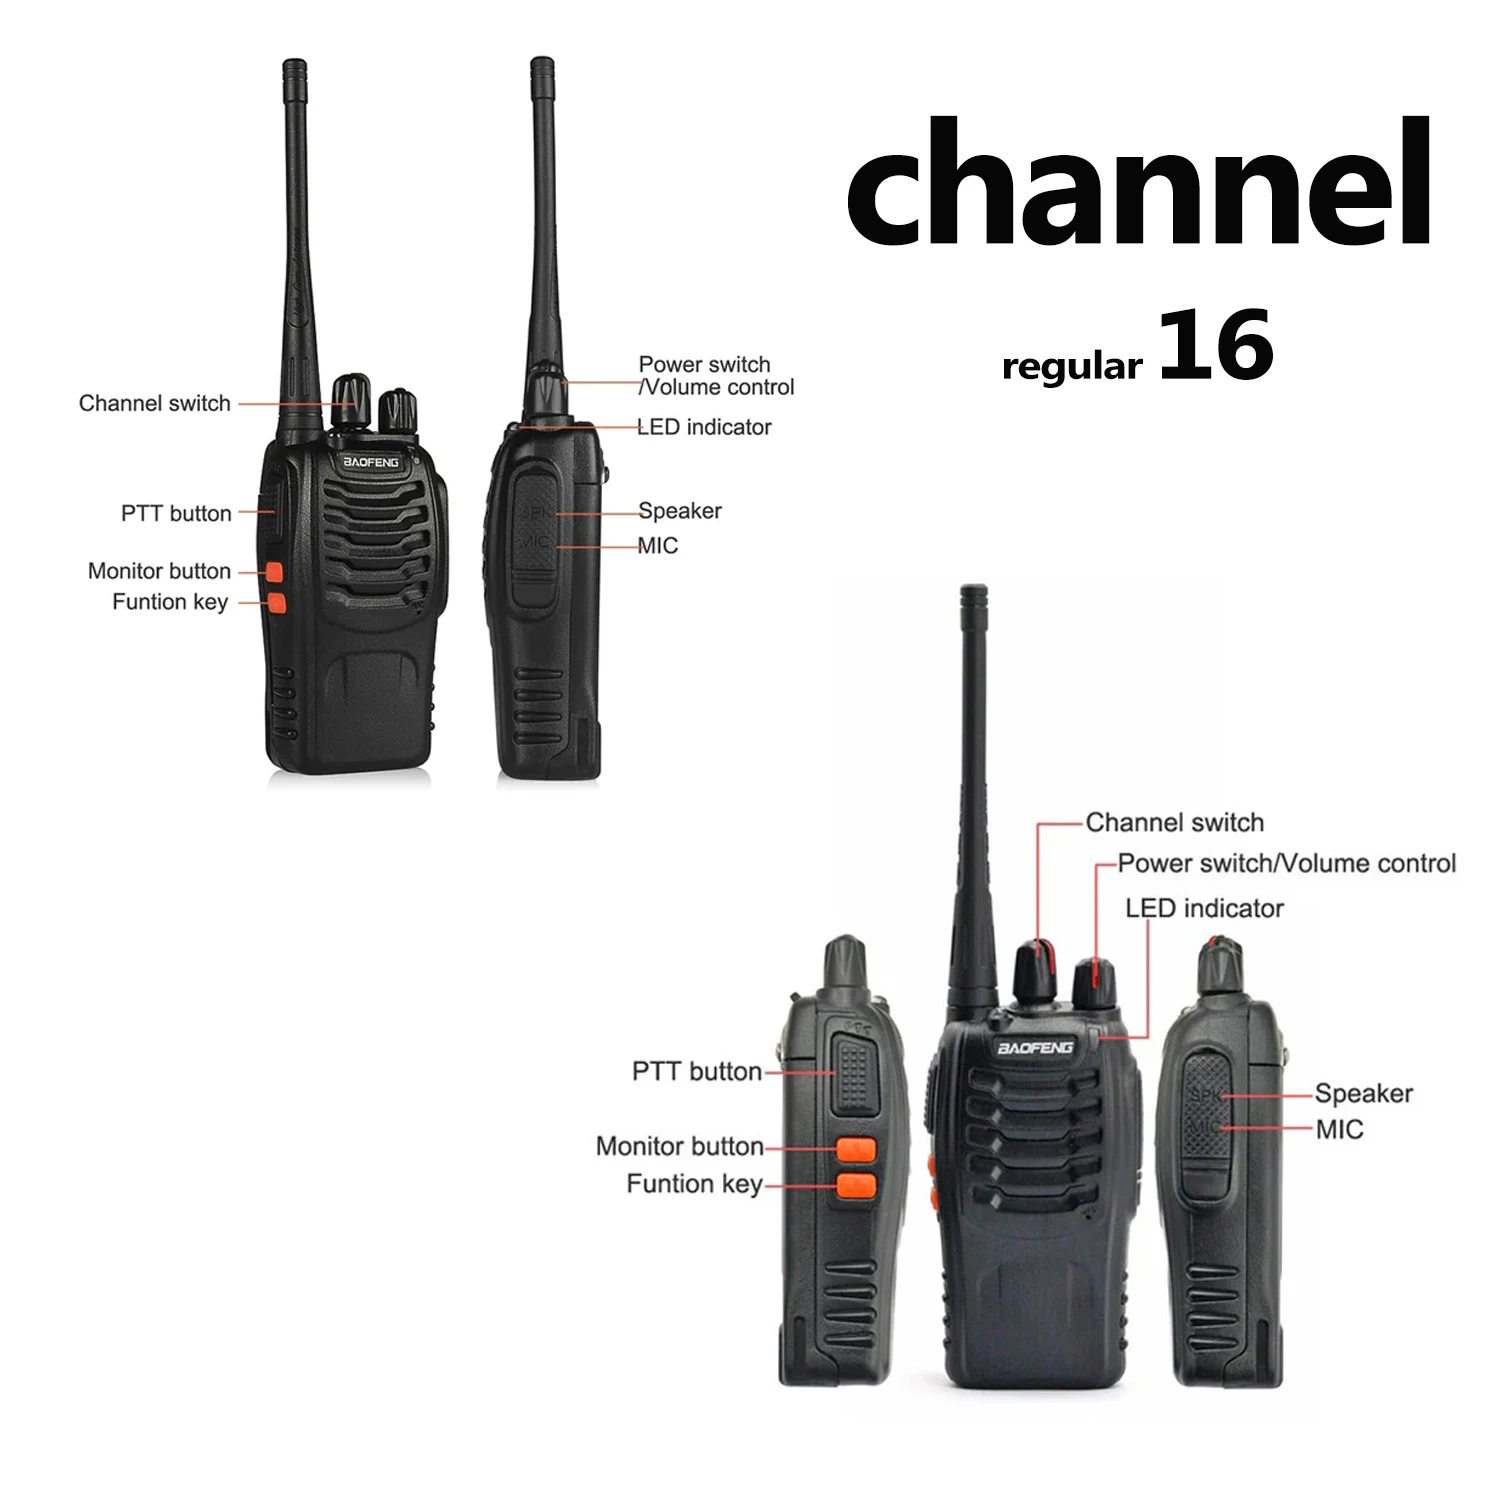 wholesale walkie talkie 2pcs BF 888s UHF 400-470MHz long range two way radios baofeng 16 channels USB charging with earpiece